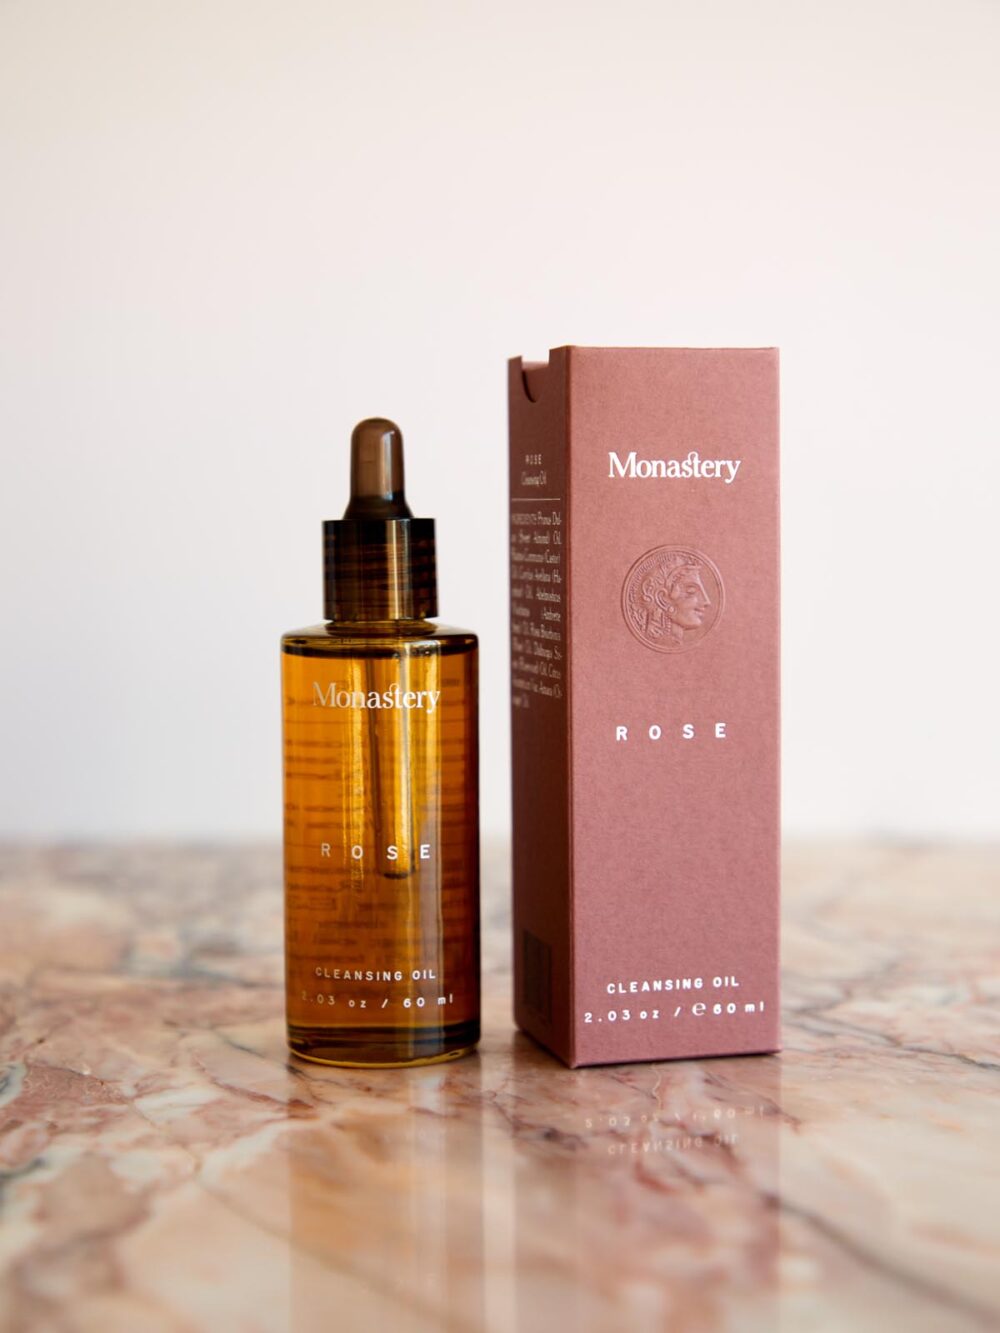 Rose Cleansing Oil with box on pink marble